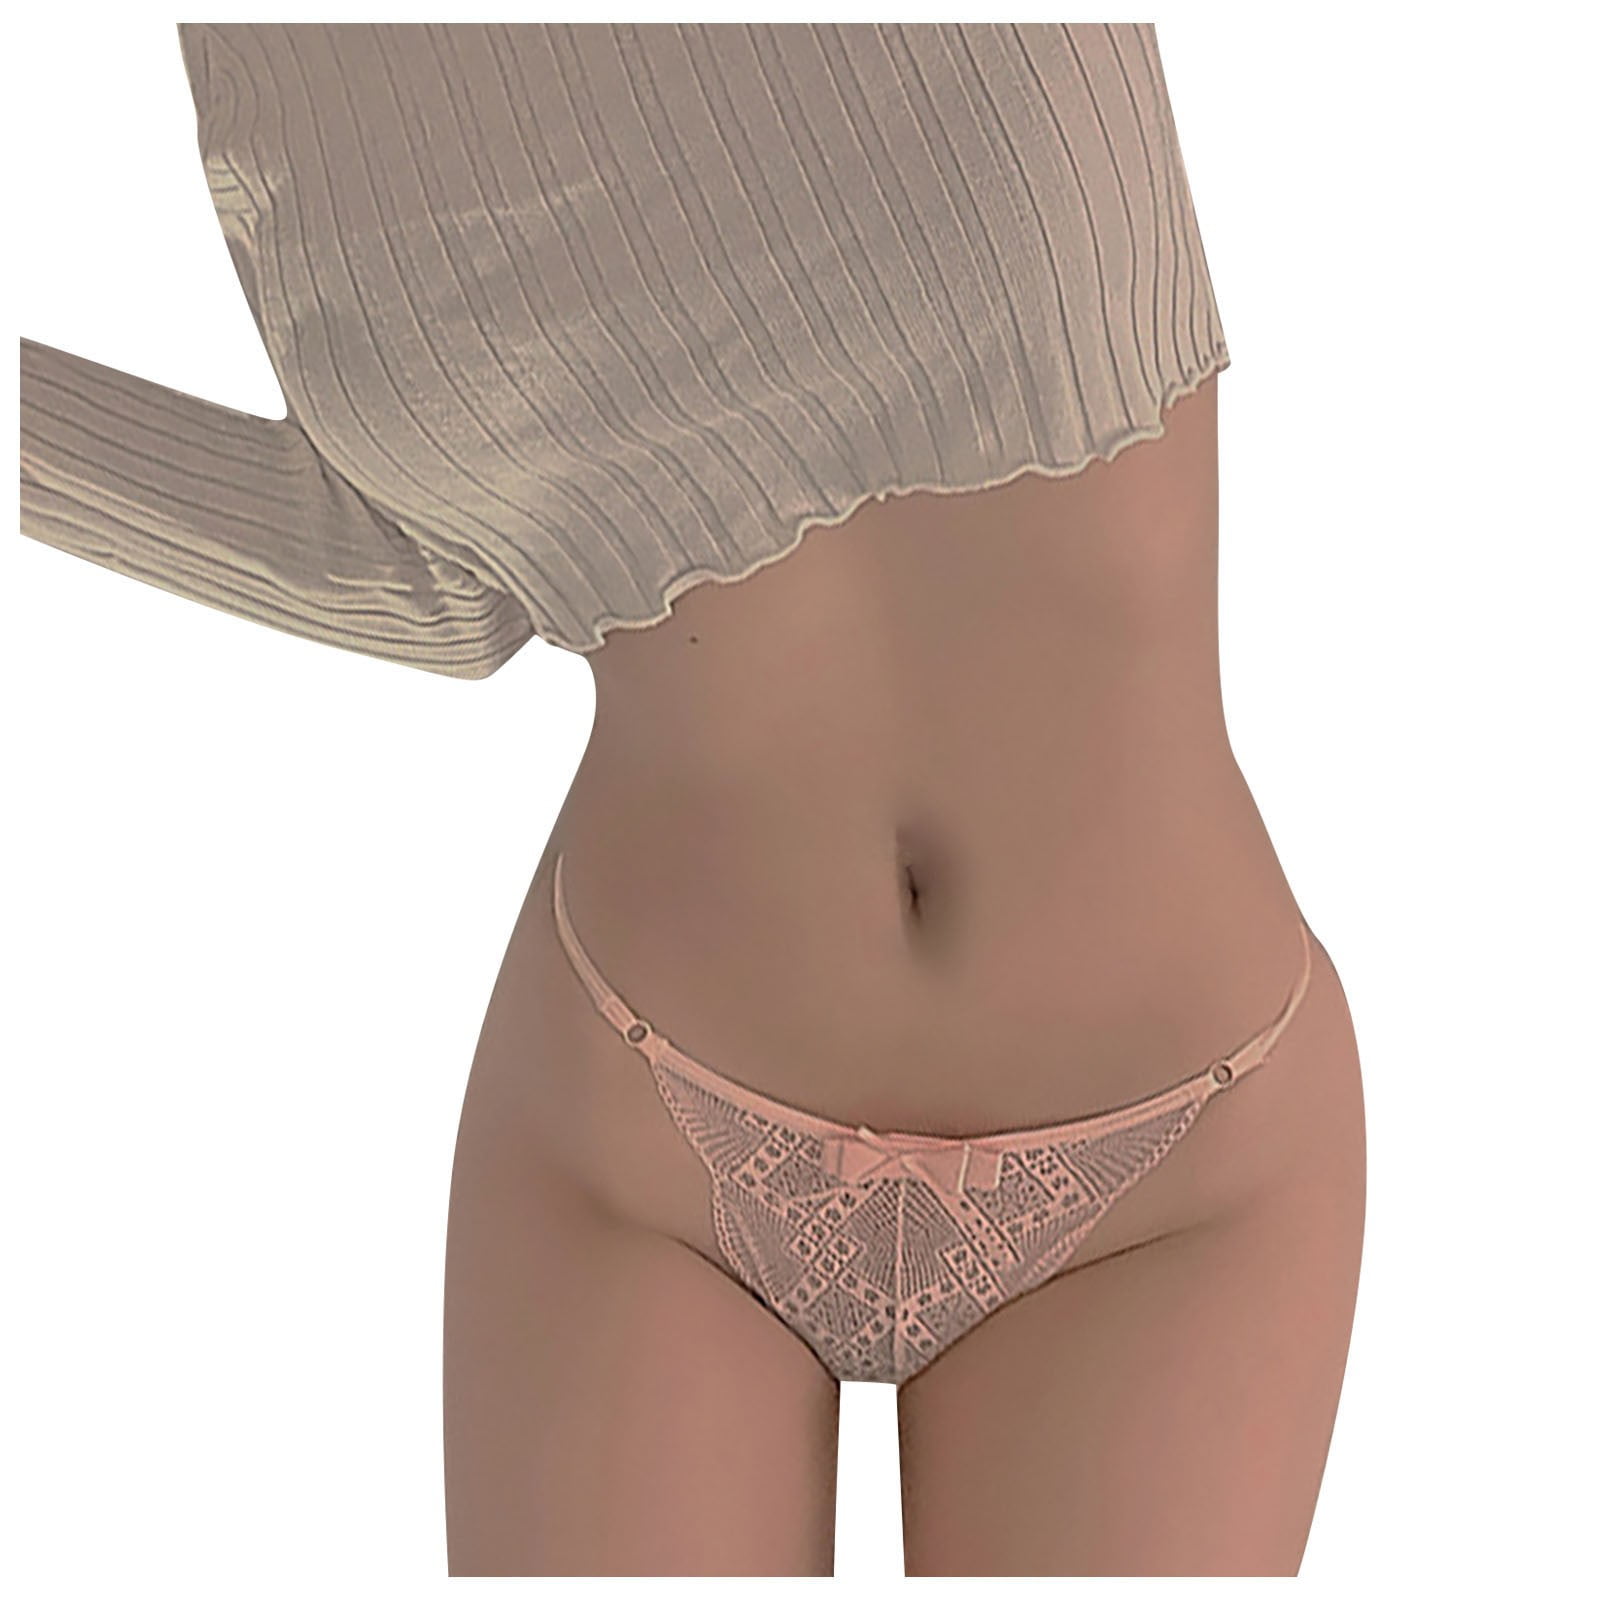 Wholesale Babes in Cotton Panties Cotton, Lace, Seamless, Shaping 